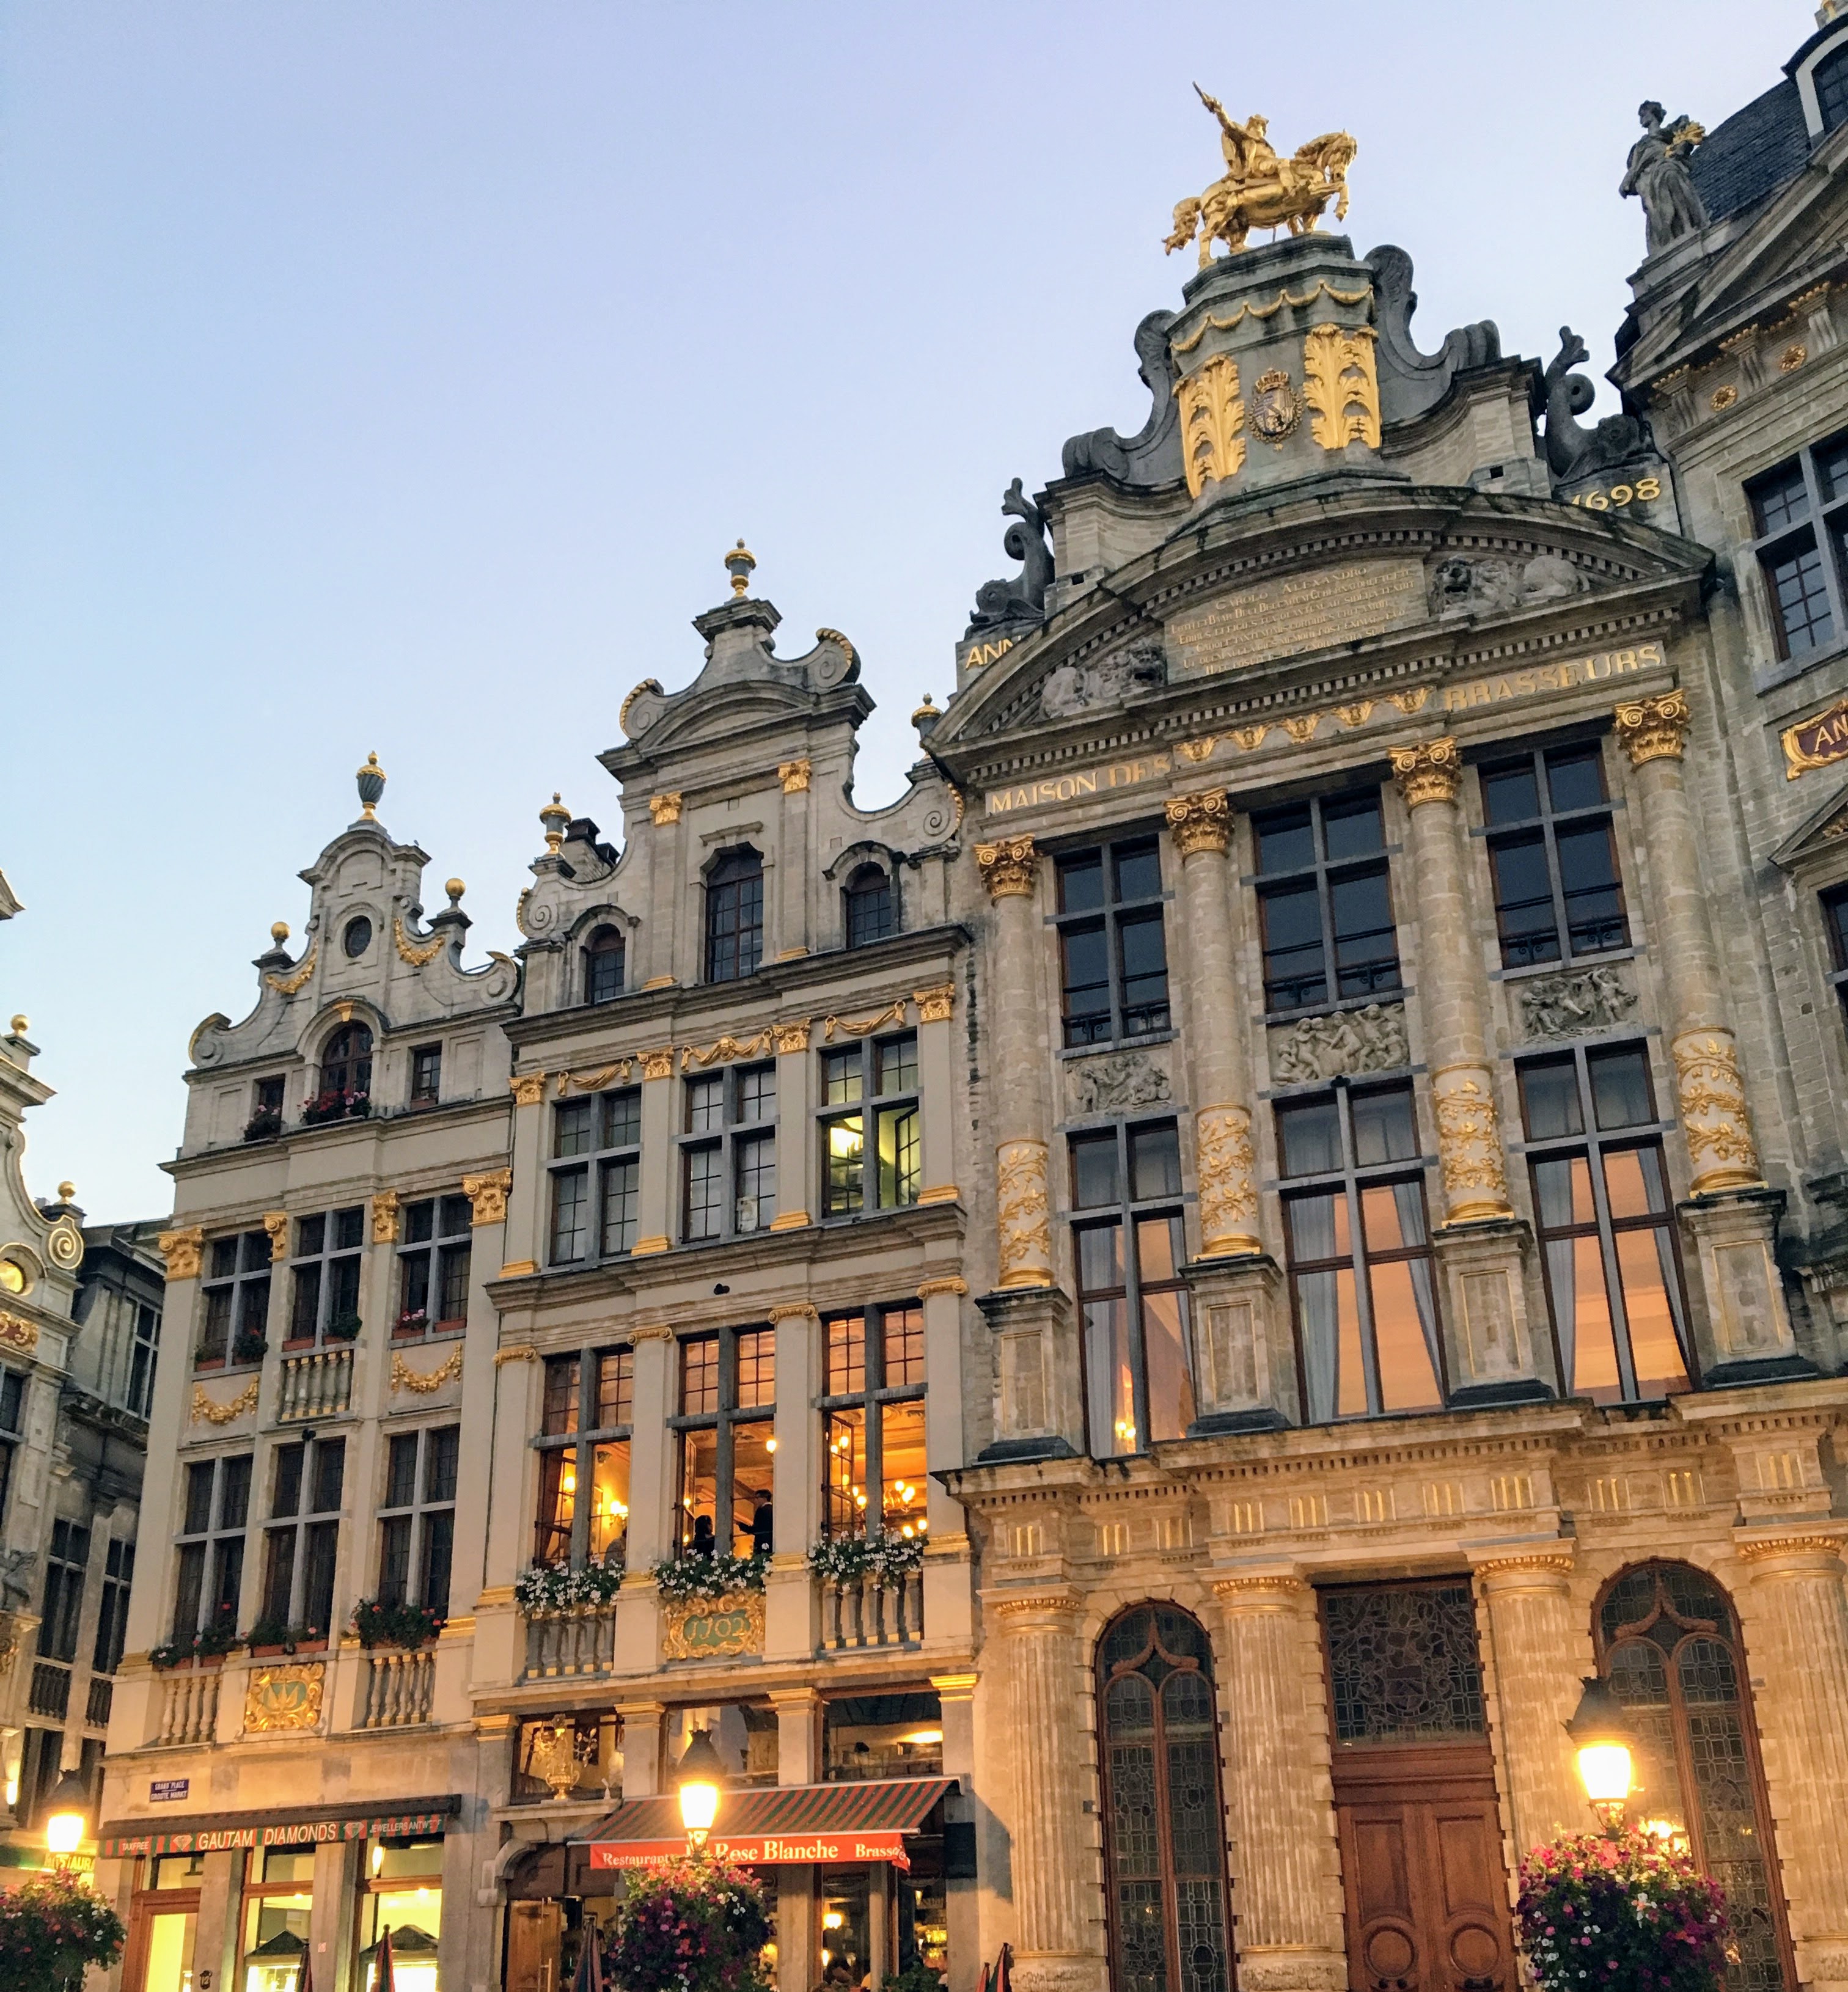 The Grand Place architecture in Brussels, Belgium